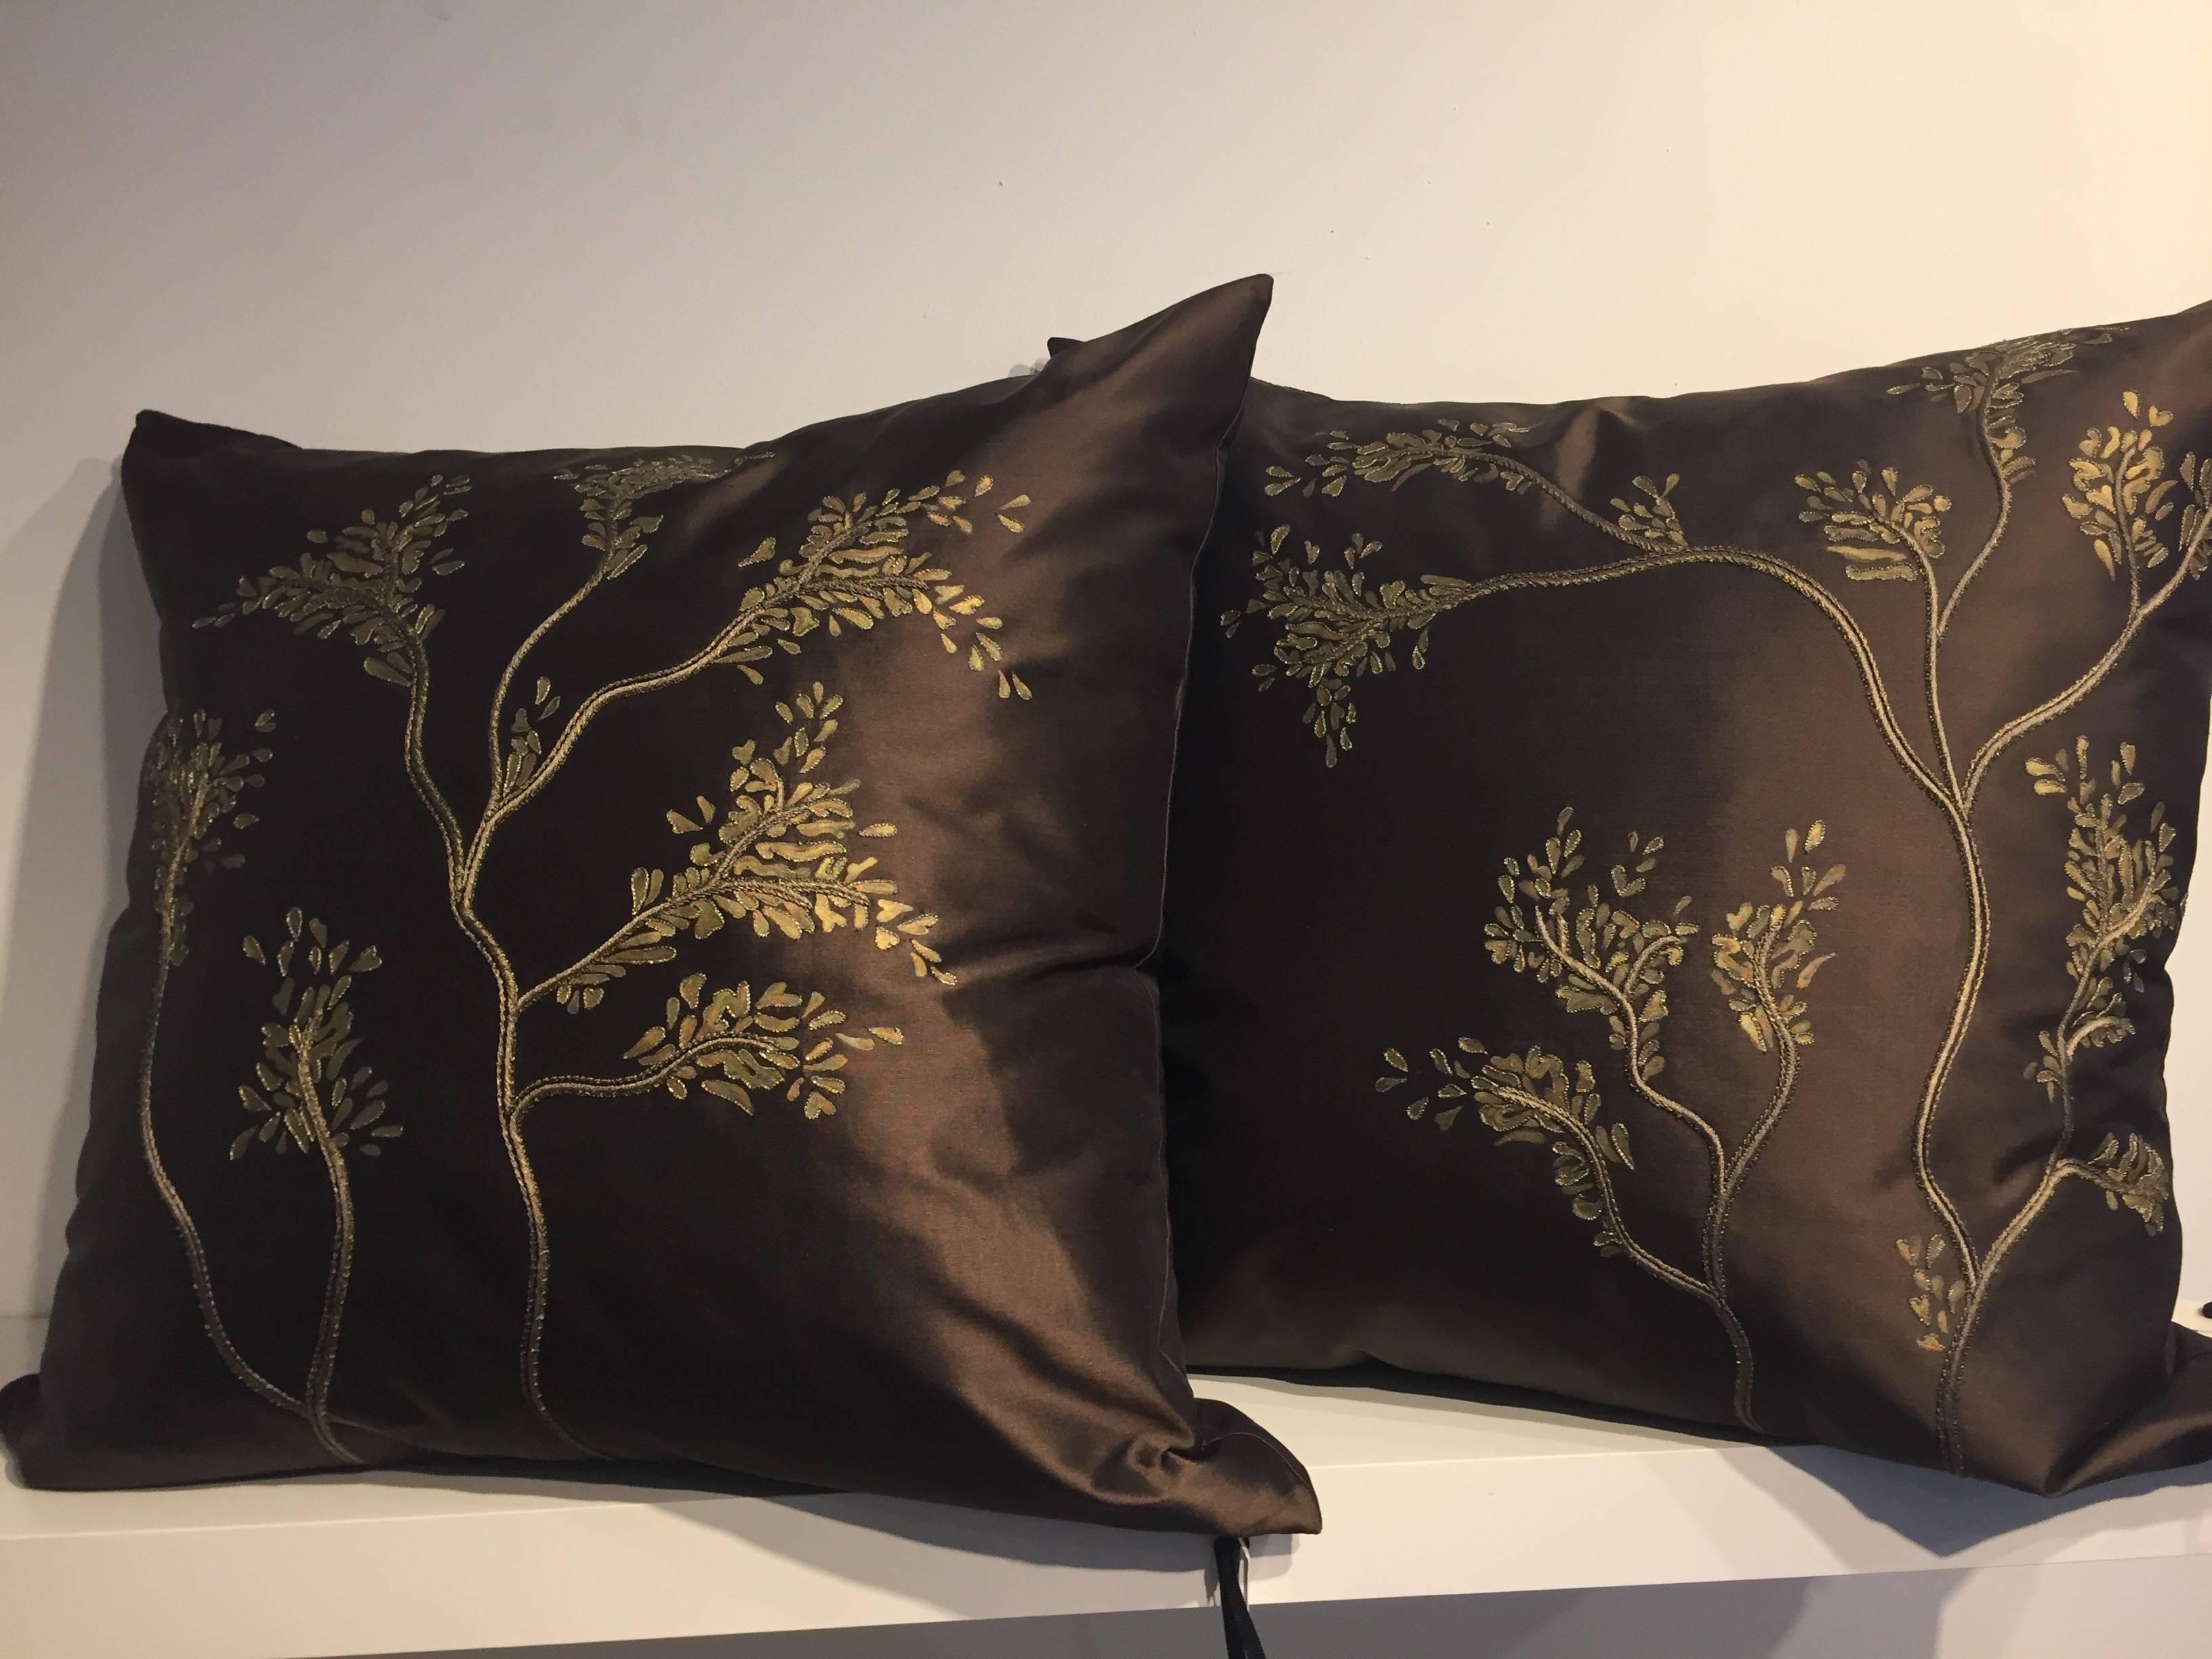 One pair of decorative cushions with hand embroidery and hand-painting in the style of Emperor's Garden, handwoven silk taffeta Chase Erwin Diva col. chocolate, embellished with hand embroidery in silk thread color brown, metal thread and